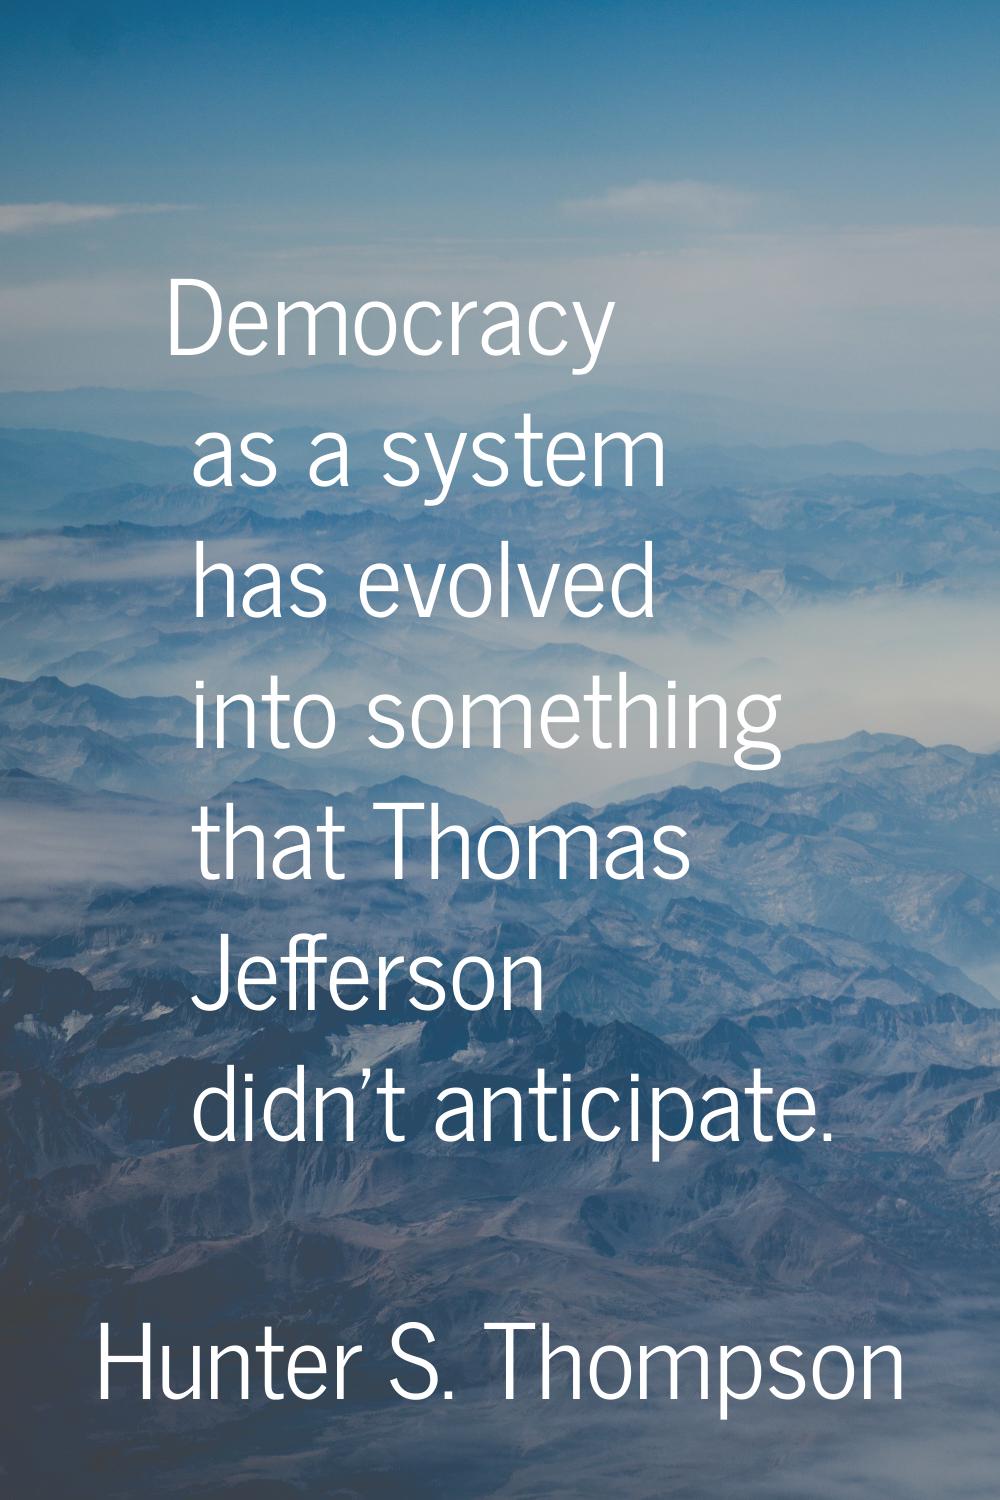 Democracy as a system has evolved into something that Thomas Jefferson didn't anticipate.